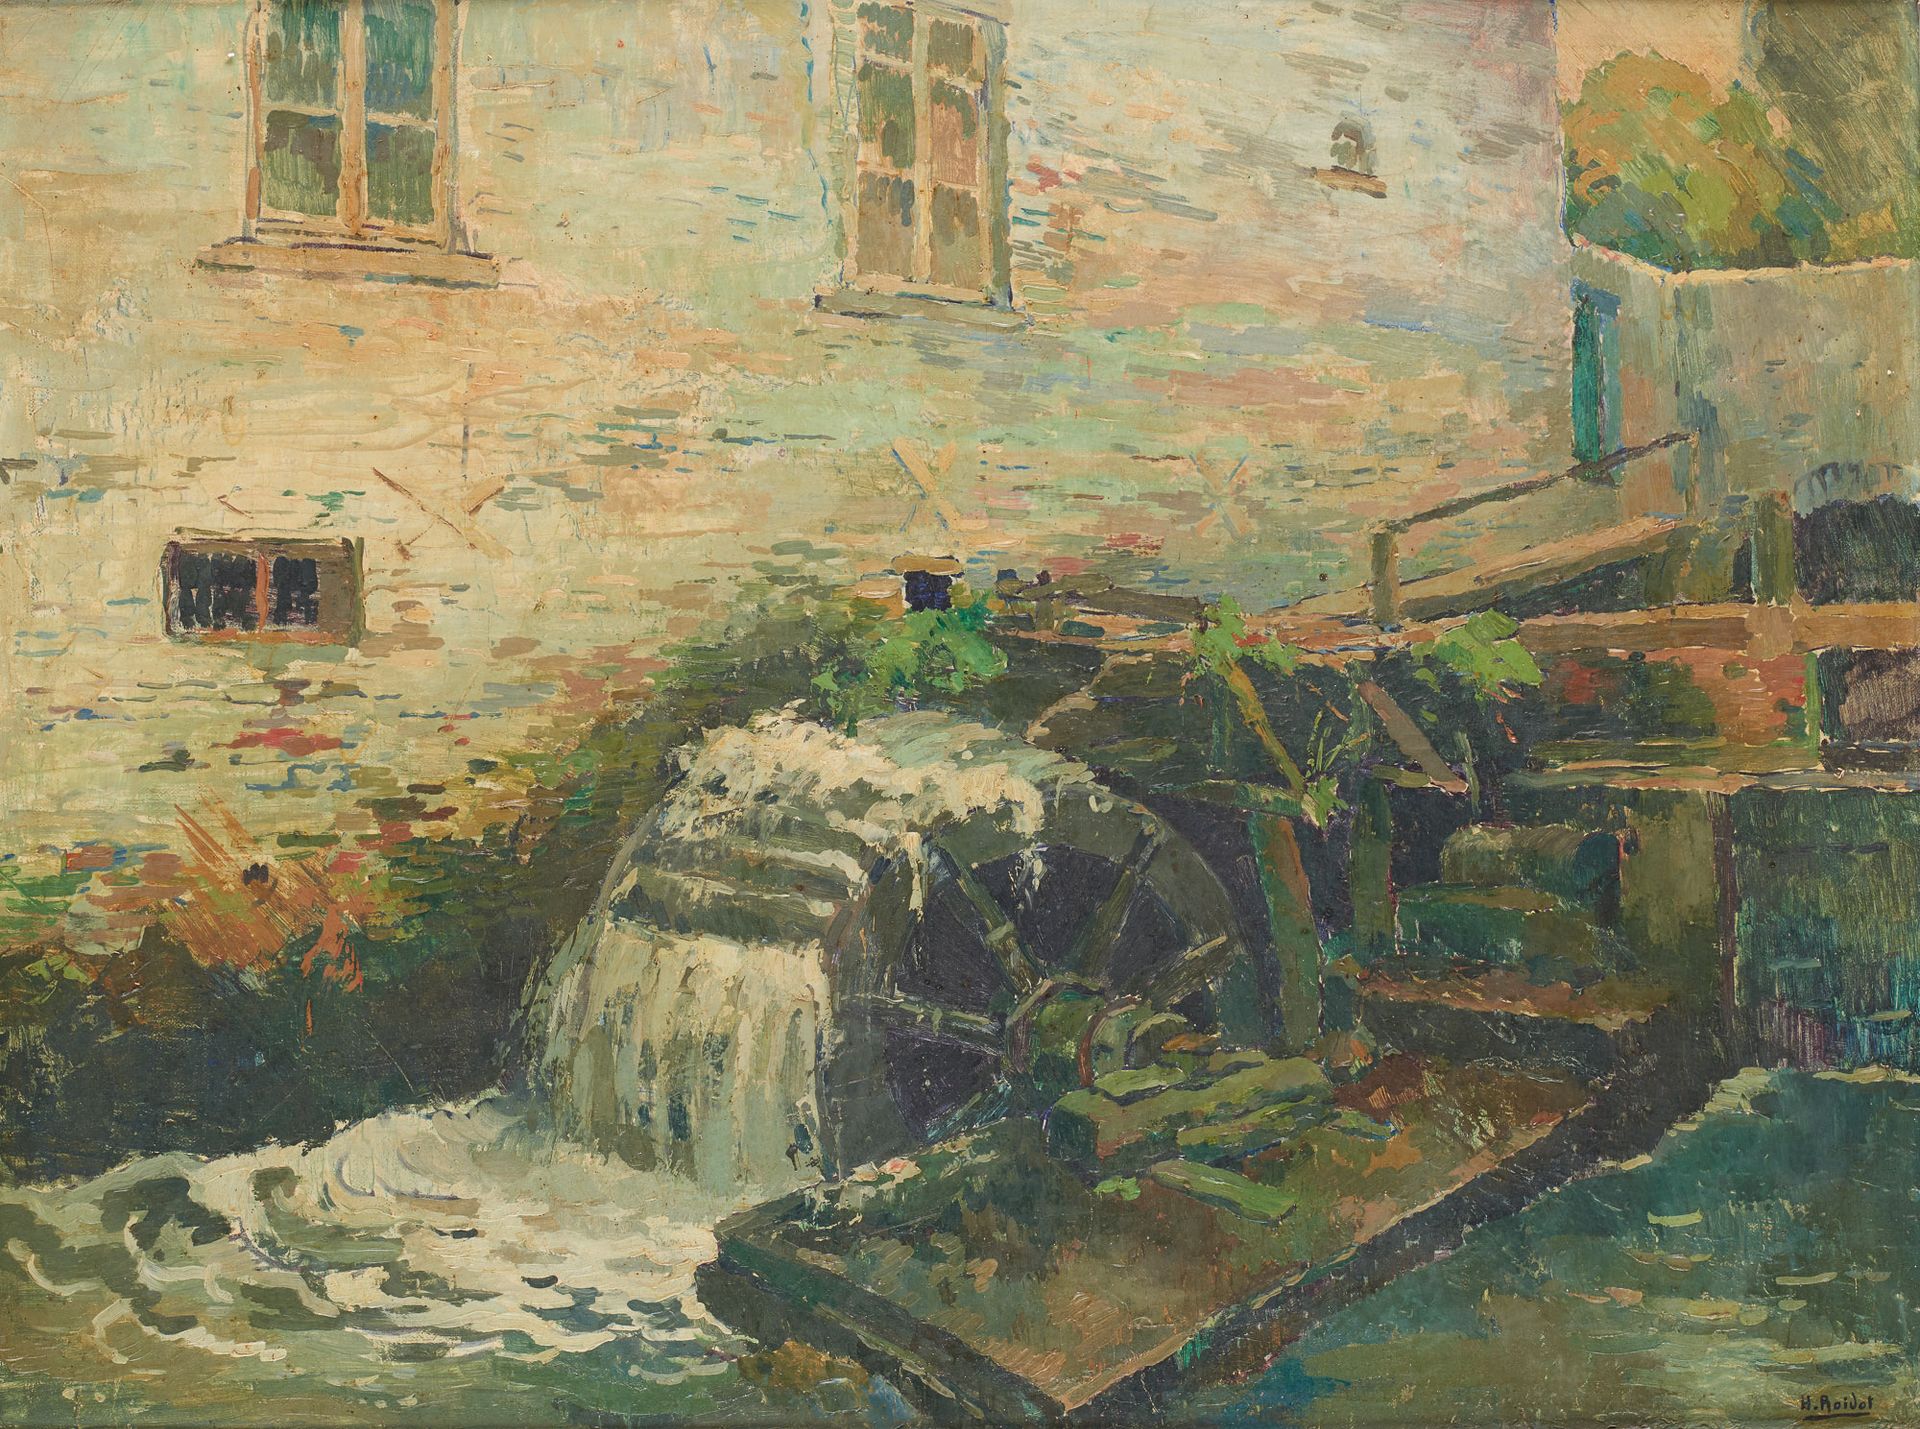 Henri ROIDOT École belge (1877-1960) Oil on canvas: The water mill.

Signed: H. &hellip;